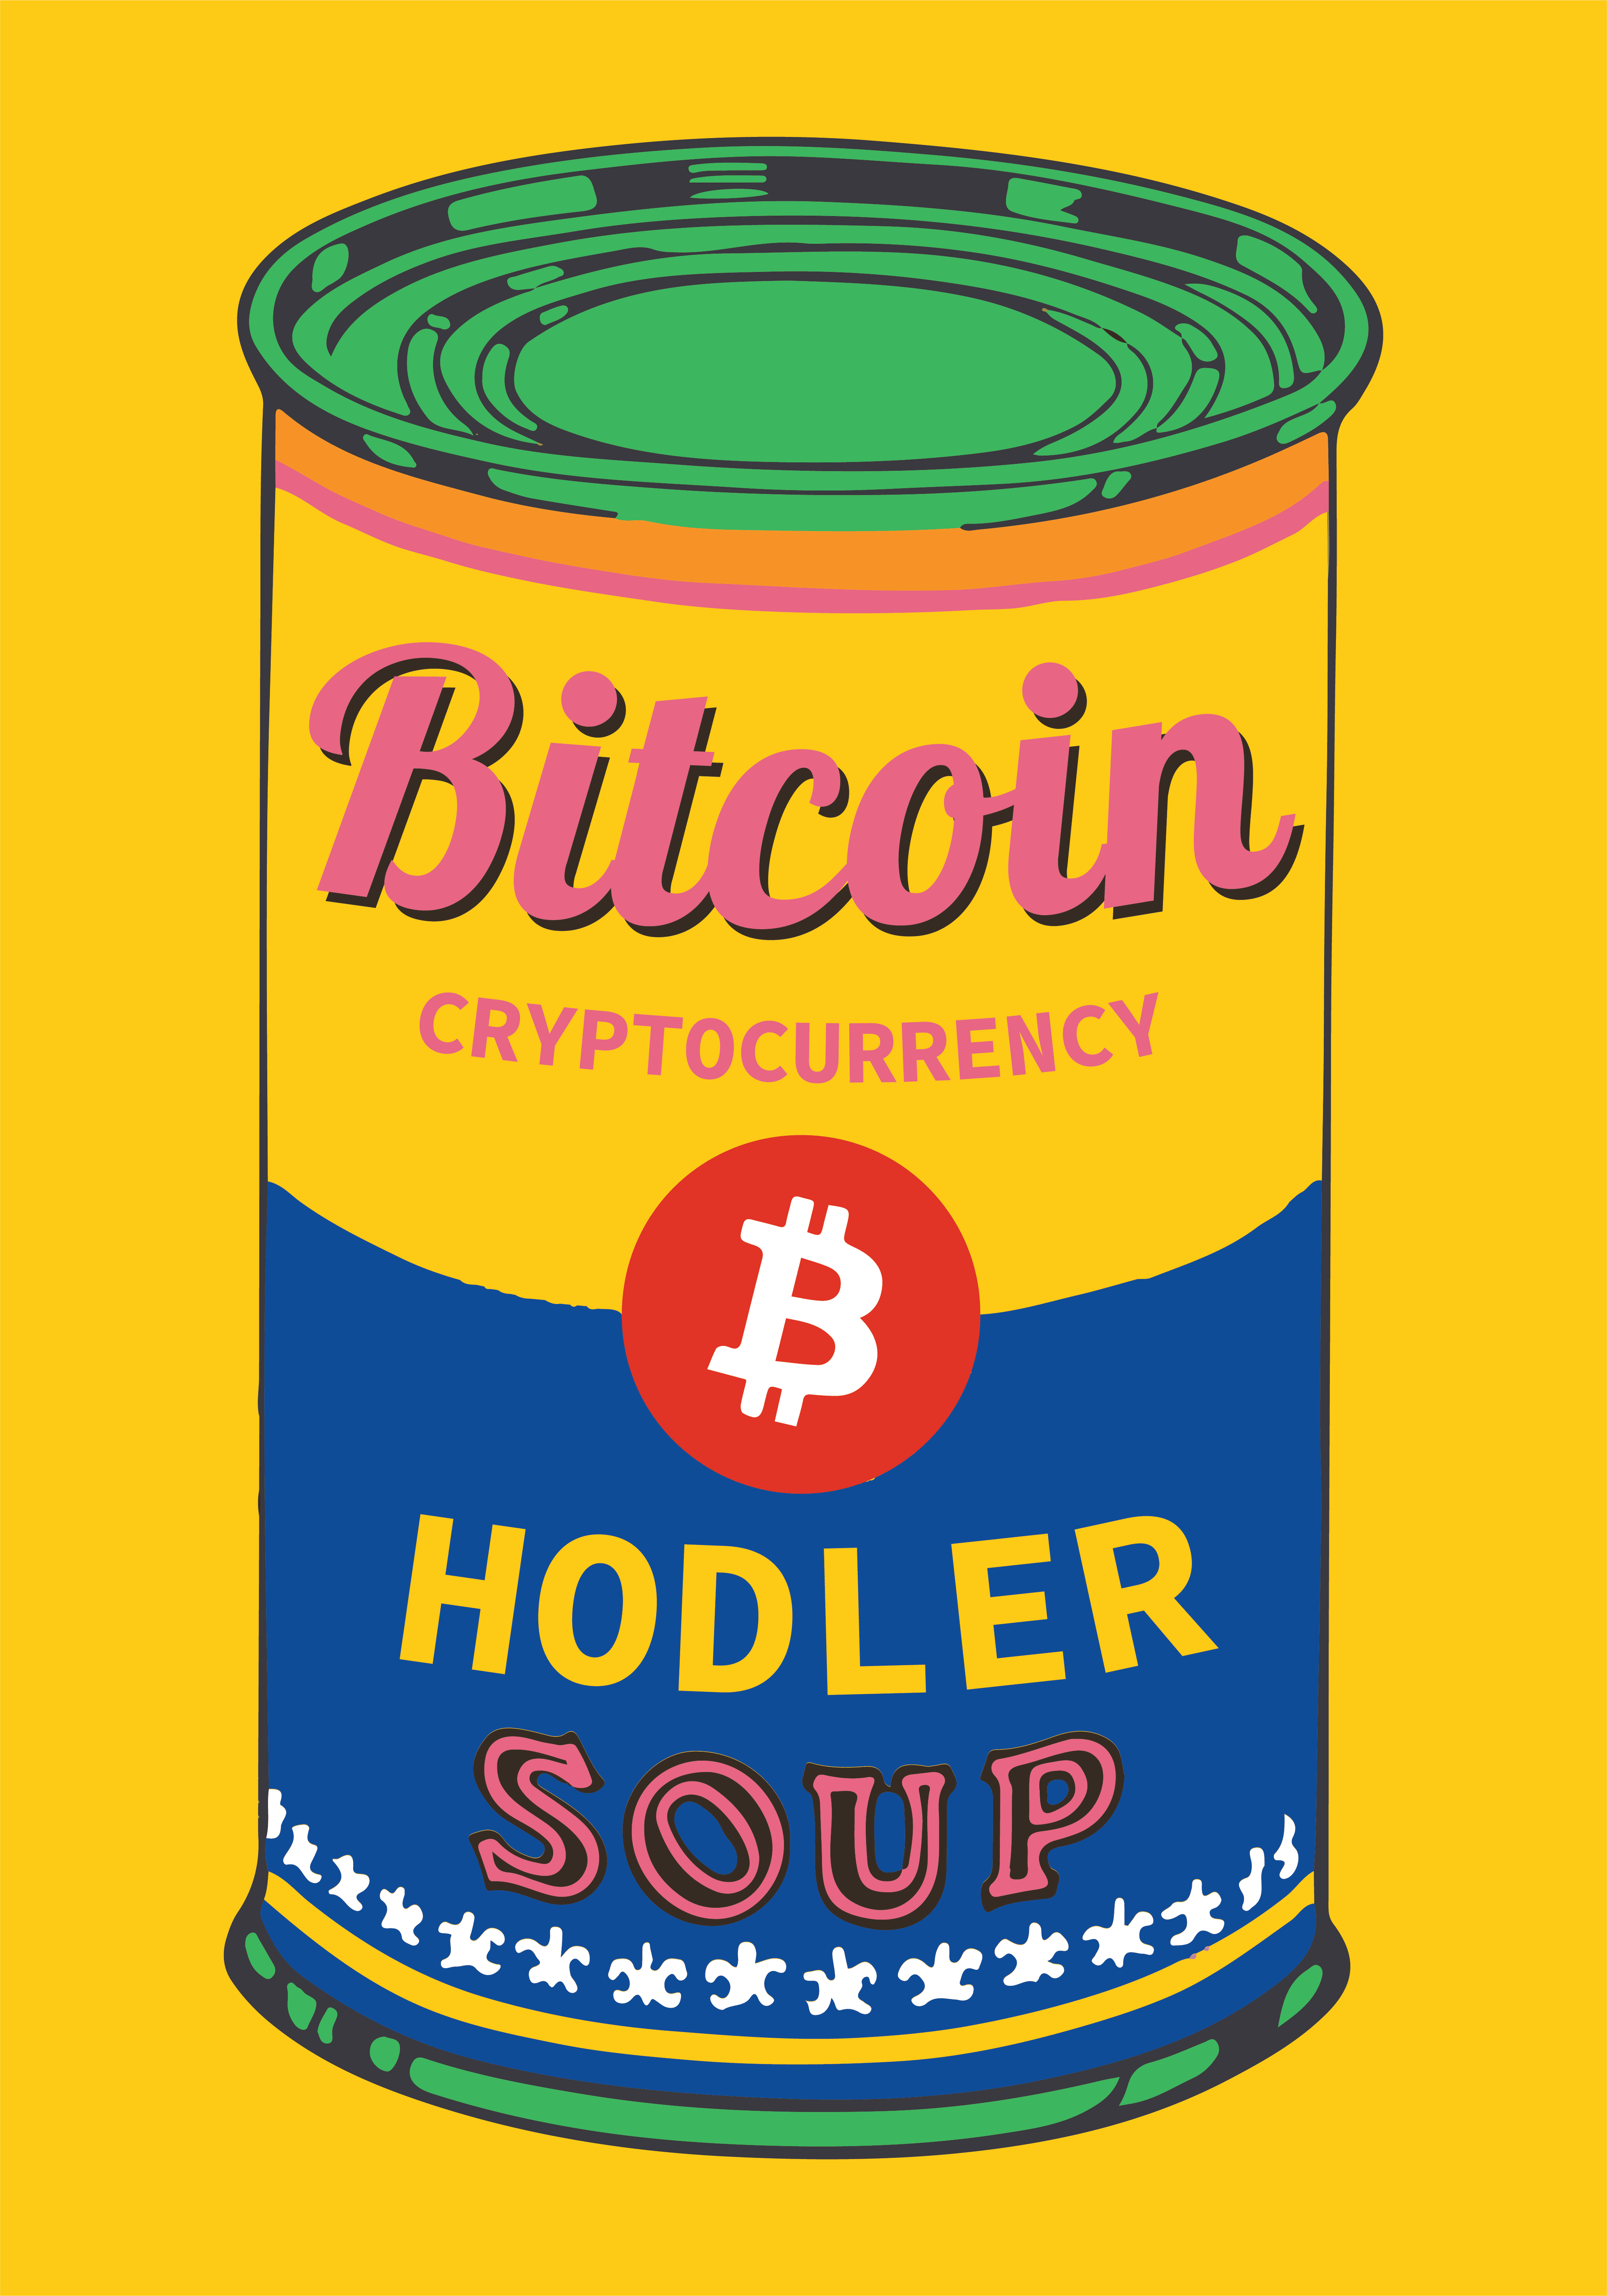 Campbell's Bitcoin soup